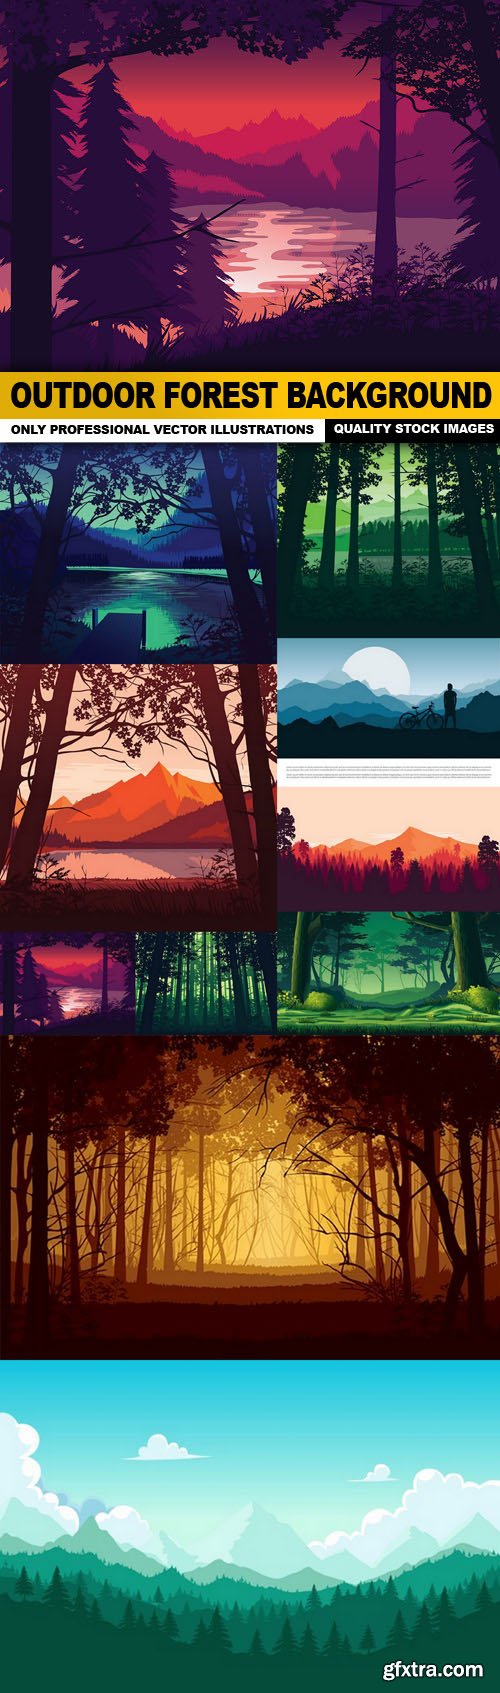 Outdoor Forest Background - 10 Vector